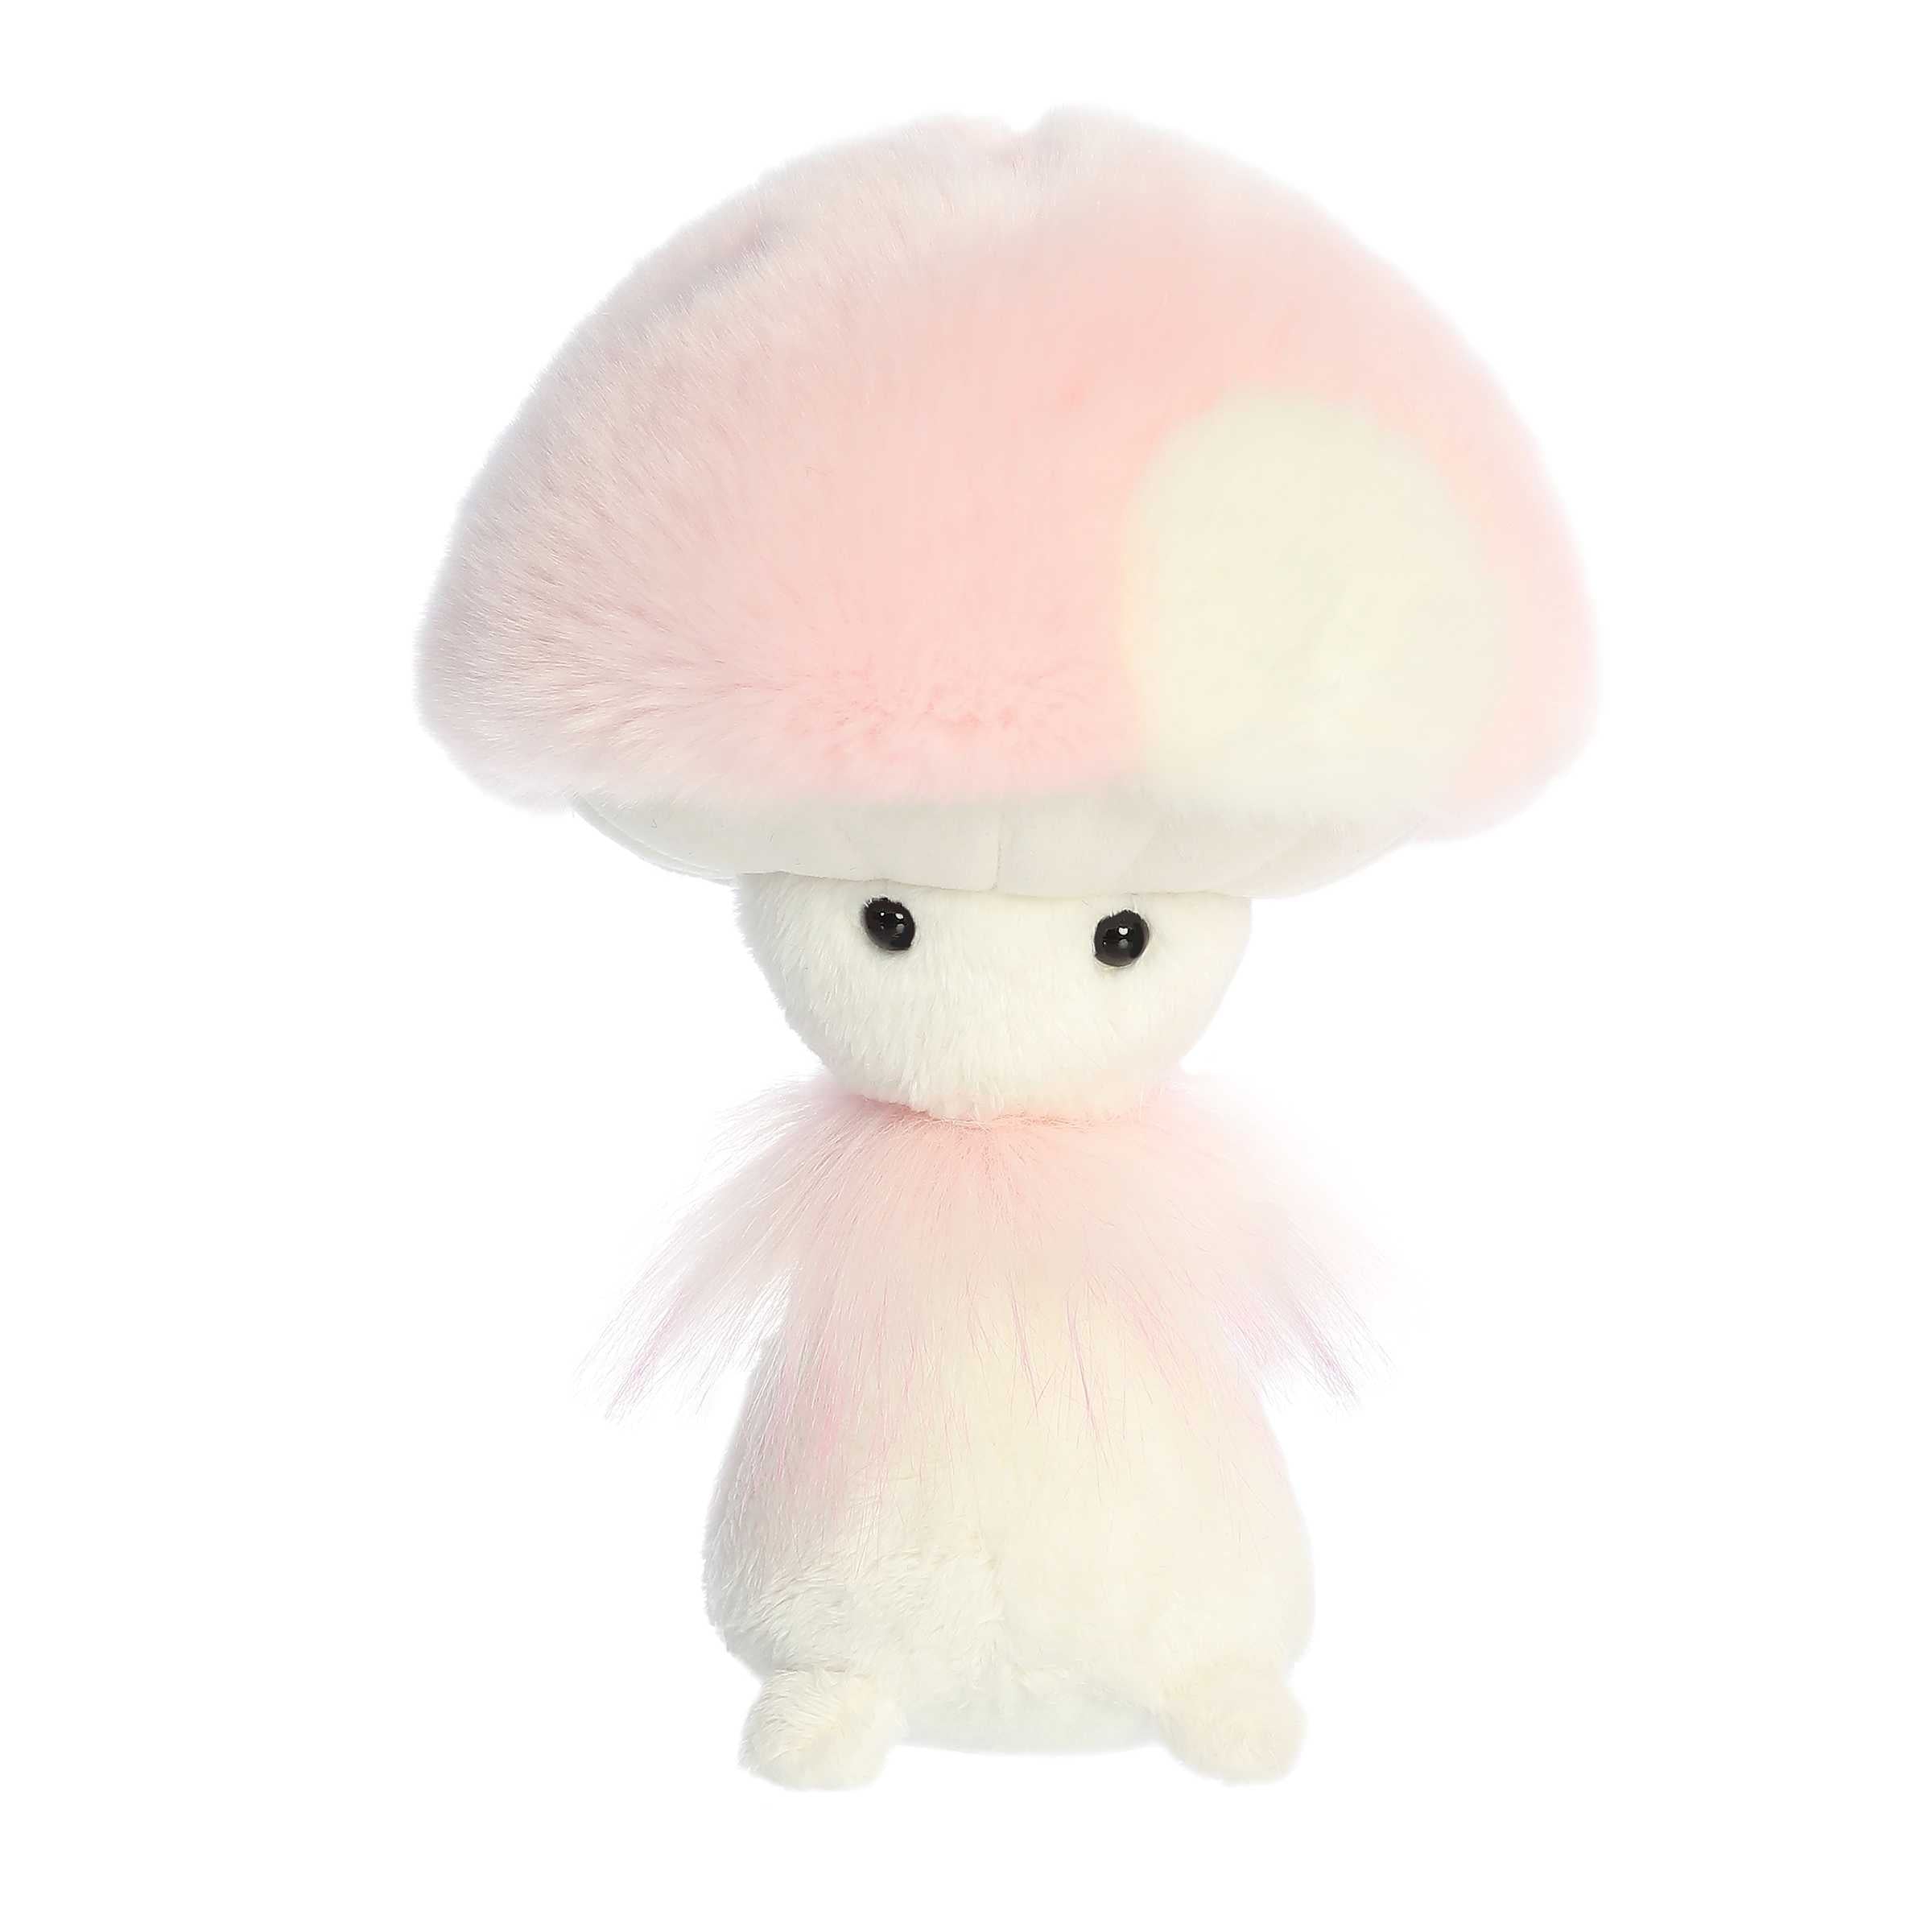 Pretty Blush mushroom plush from Fungi Friends, featuring soft, calm hues, ideal for adding serenity to any plush collection